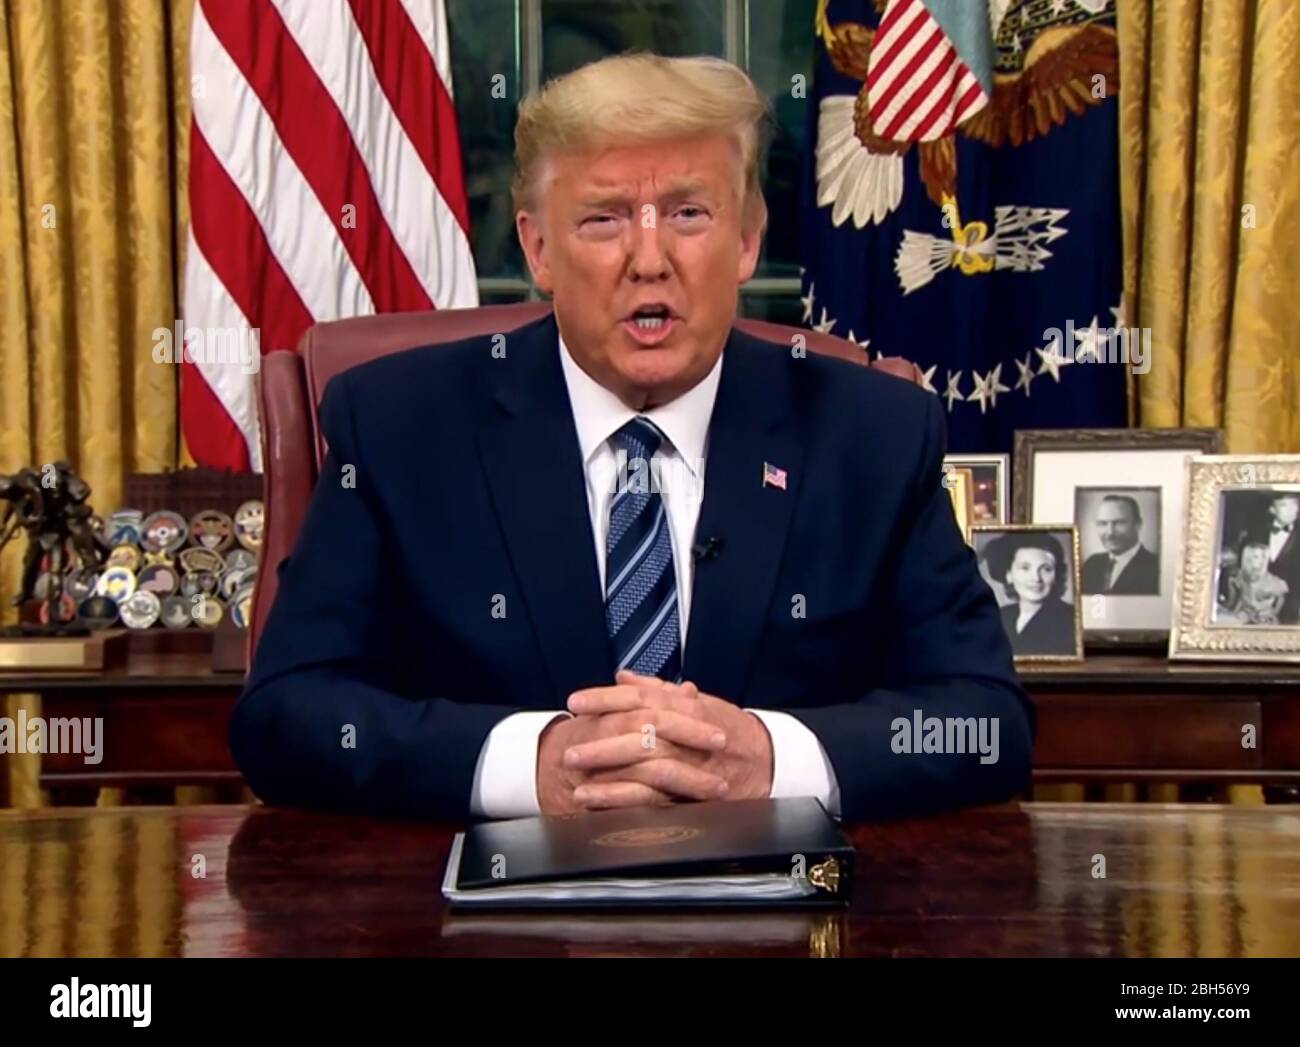 U.S. President Donald Trump addresses the nation from the Oval Office of the White House on March 11, 2020, concerning the coronavirus pandemic, a European travel ban, and an economic stimulus package for U.S. citizens and small businesses. (USA) Stock Photo